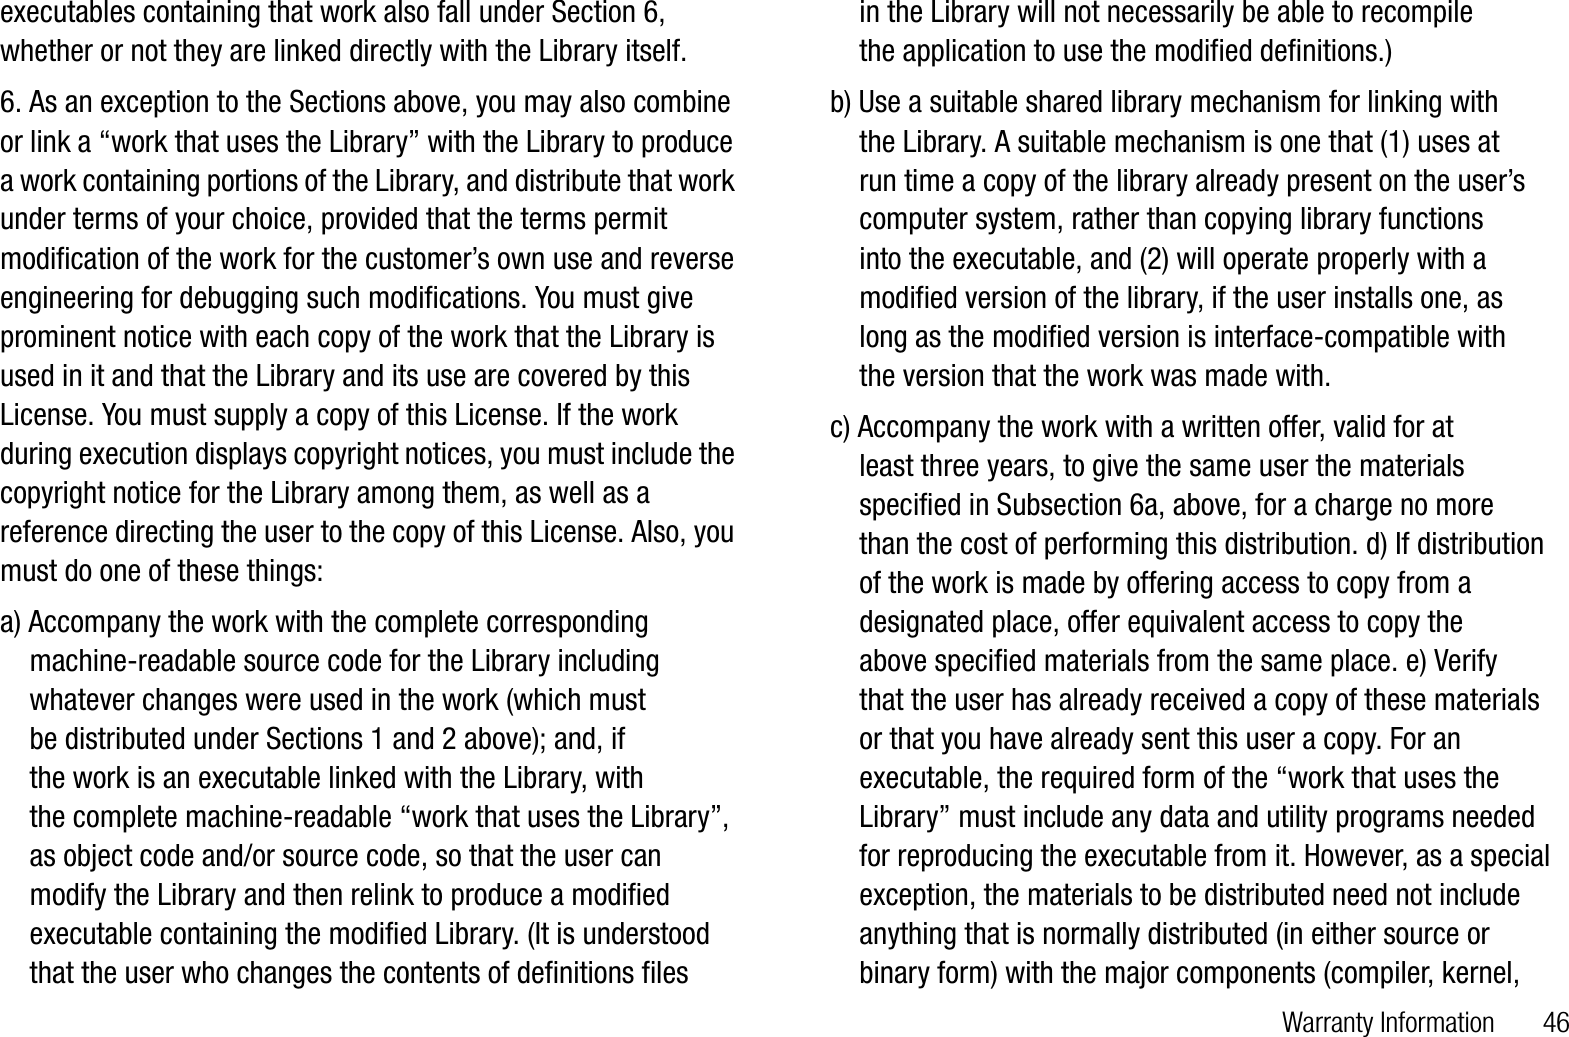 Warranty Information       46executables containing that work also fall under Section 6, whether or not they are linked directly with the Library itself.6. As an exception to the Sections above, you may also combine or link a “work that uses the Library” with the Library to produce a work containing portions of the Library, and distribute that work under terms of your choice, provided that the terms permit modification of the work for the customer’s own use and reverse engineering for debugging such modifications. You must give prominent notice with each copy of the work that the Library is used in it and that the Library and its use are covered by this License. You must supply a copy of this License. If the work during execution displays copyright notices, you must include the copyright notice for the Library among them, as well as a reference directing the user to the copy of this License. Also, you must do one of these things:a) Accompany the work with the complete corresponding    machine-readable source code for the Library including    whatever changes were used in the work (which must     be distributed under Sections 1 and 2 above); and, if     the work is an executable linked with the Library, with     the complete machine-readable “work that uses the Library”,    as object code and/or source code, so that the user can    modify the Library and then relink to produce a modified    executable containing the modified Library. (It is understood    that the user who changes the contents of definitions files     in the Library will not necessarily be able to recompile     the application to use the modified definitions.)b) Use a suitable shared library mechanism for linking with     the Library. A suitable mechanism is one that (1) uses at     run time a copy of the library already present on the user’s    computer system, rather than copying library functions     into the executable, and (2) will operate properly with a    modified version of the library, if the user installs one, as     long as the modified version is interface-compatible with     the version that the work was made with.c) Accompany the work with a written offer, valid for at     least three years, to give the same user the materials    specified in Subsection 6a, above, for a charge no more    than the cost of performing this distribution. d) If distribution    of the work is made by offering access to copy from a    designated place, offer equivalent access to copy the     above specified materials from the same place. e) Verify     that the user has already received a copy of these materials    or that you have already sent this user a copy. For an    executable, the required form of the “work that uses the    Library” must include any data and utility programs needed    for reproducing the executable from it. However, as a special    exception, the materials to be distributed need not include    anything that is normally distributed (in either source or    binary form) with the major components (compiler, kernel,